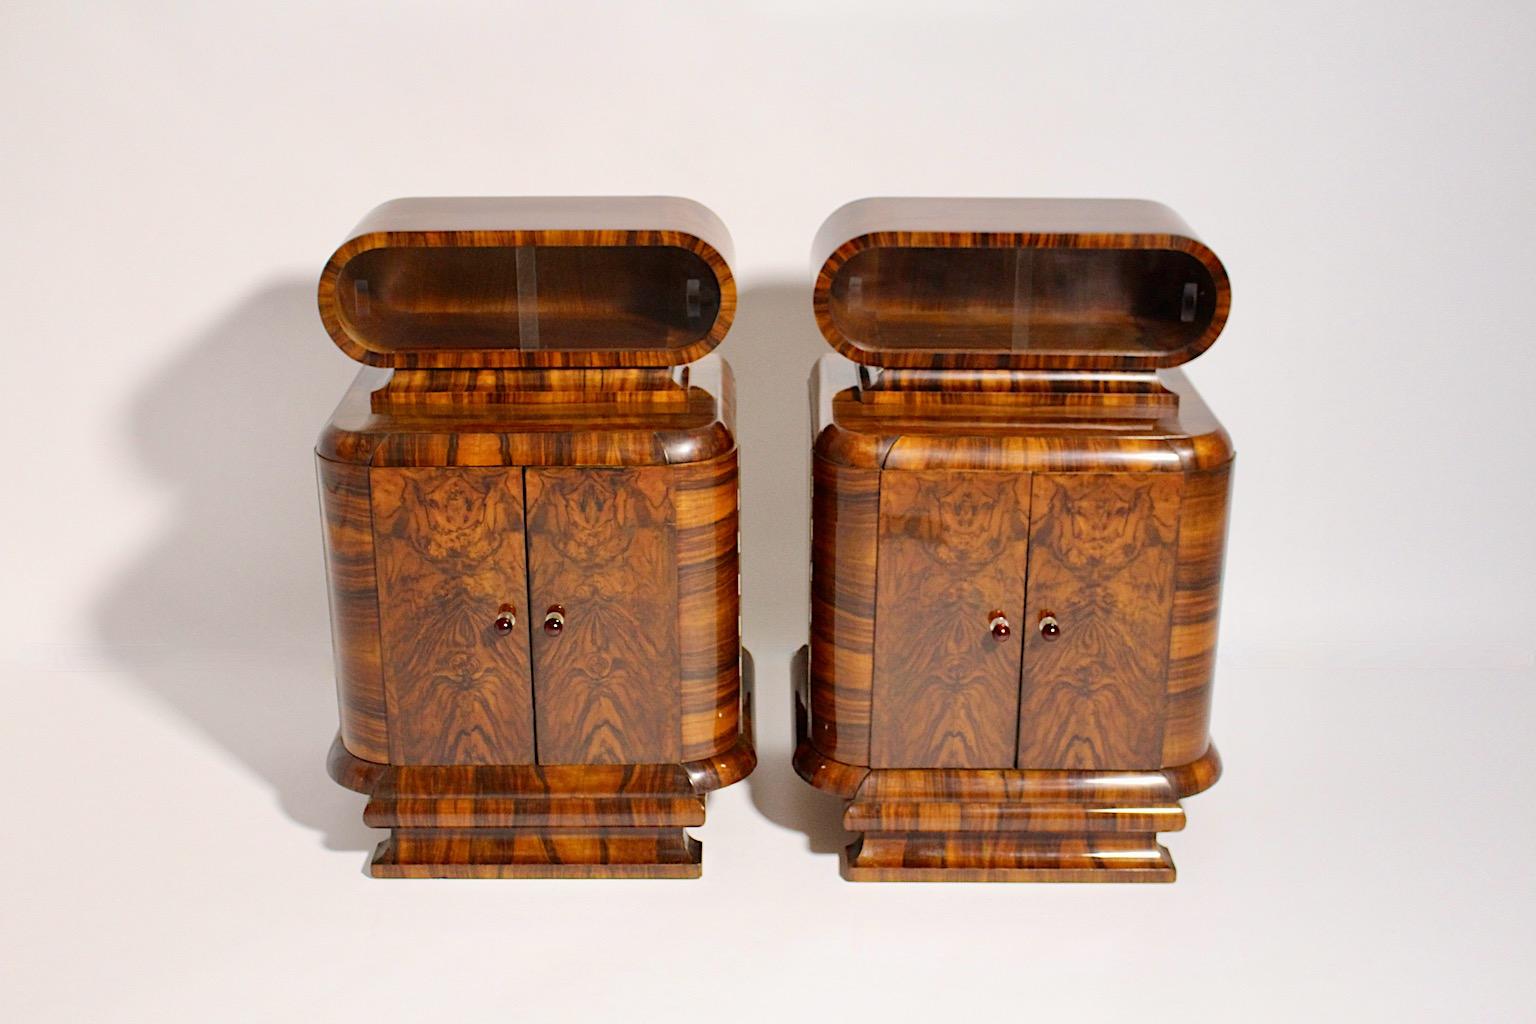 Bakelite Art Deco Walnut Vintage Pair of Nightstands or Chests or Commodes 1930s Vienna For Sale